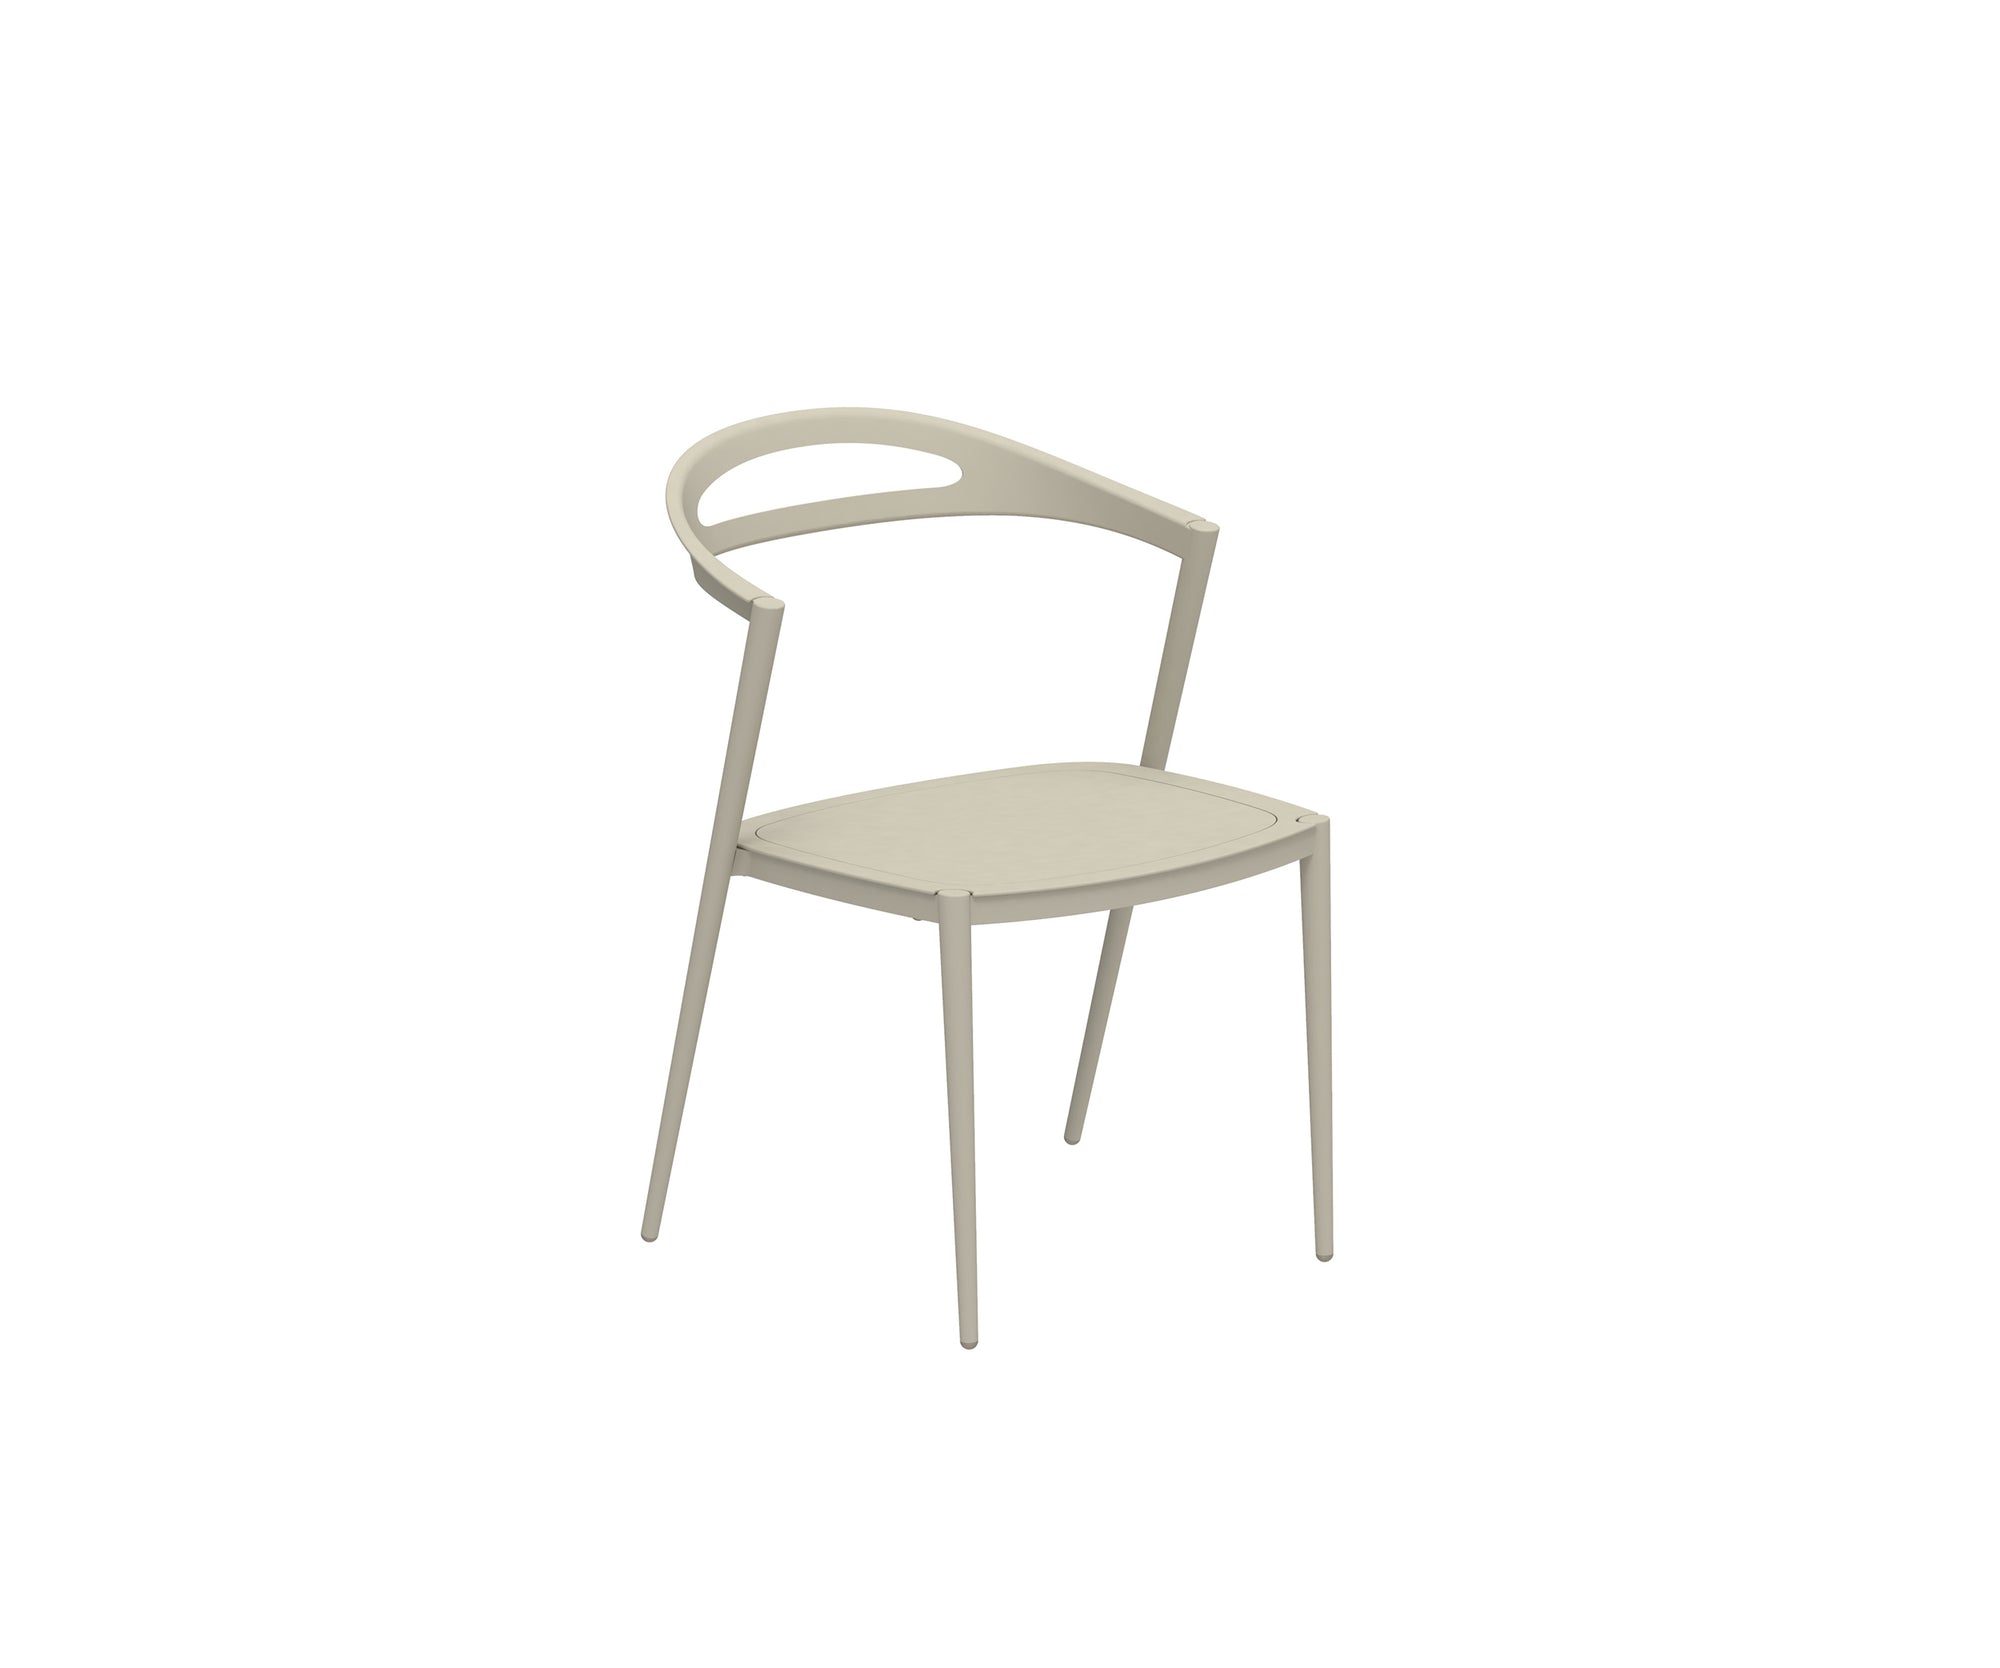 Styletto Dining Chair | Royal Botania